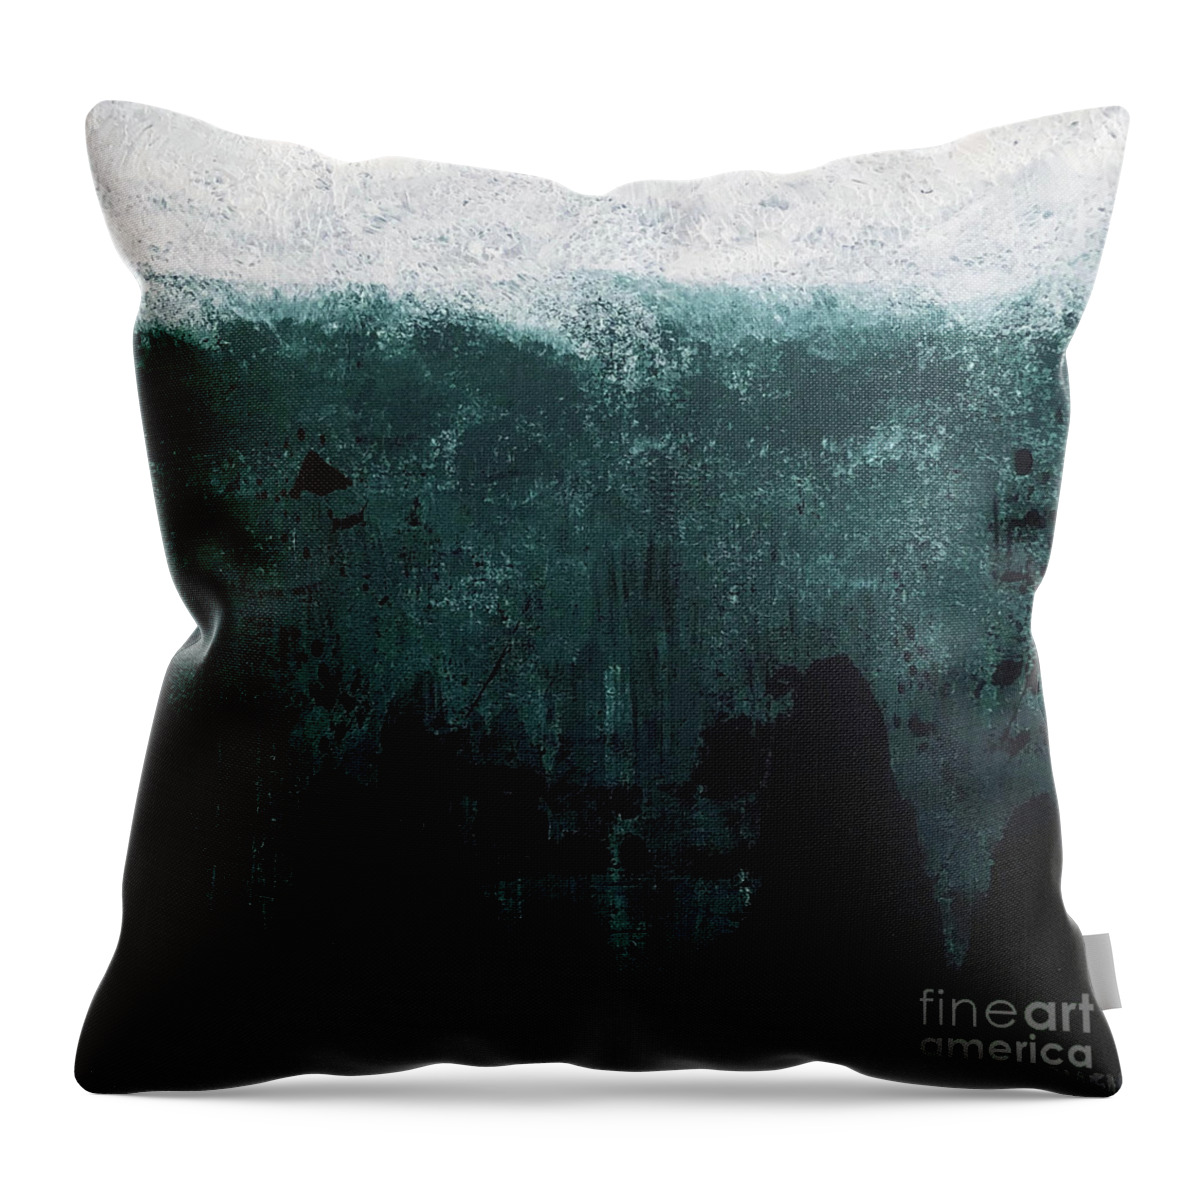 Avalanche Throw Pillow featuring the painting Avalanche by Amanda Sheil